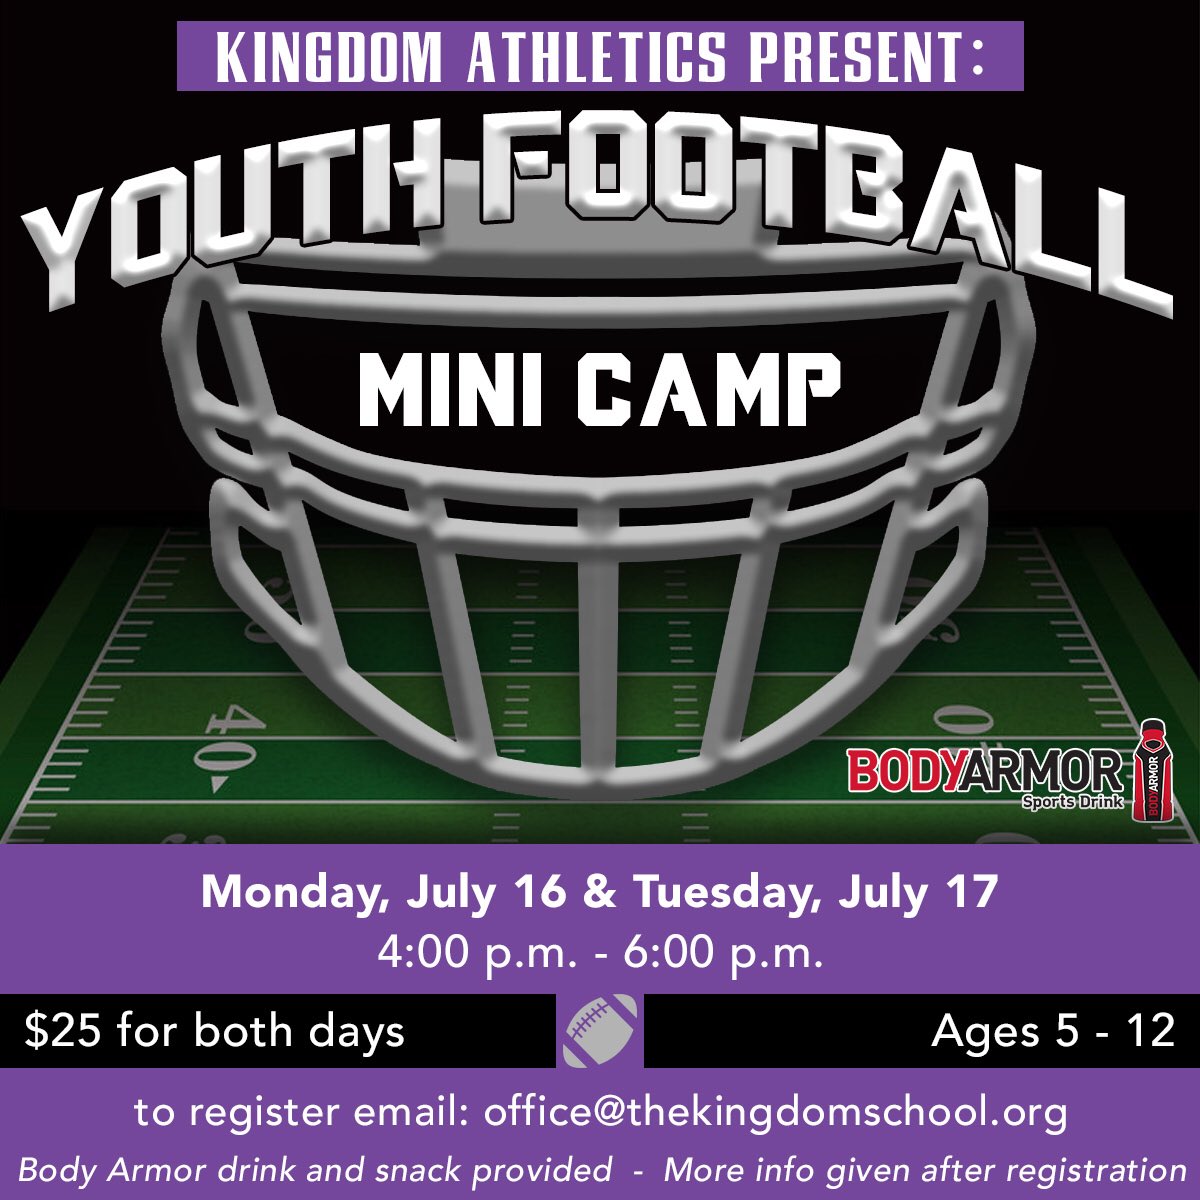 Don’t forget to register or share this with others that KPS is having their first youth football camp this summer for 2 days and only $25! Plus Body Armor sports drinks will be provided and a snack daily. #bringthereign #kpsfootball #crownsup #drinkbodyarmor #switch2bodyarmor